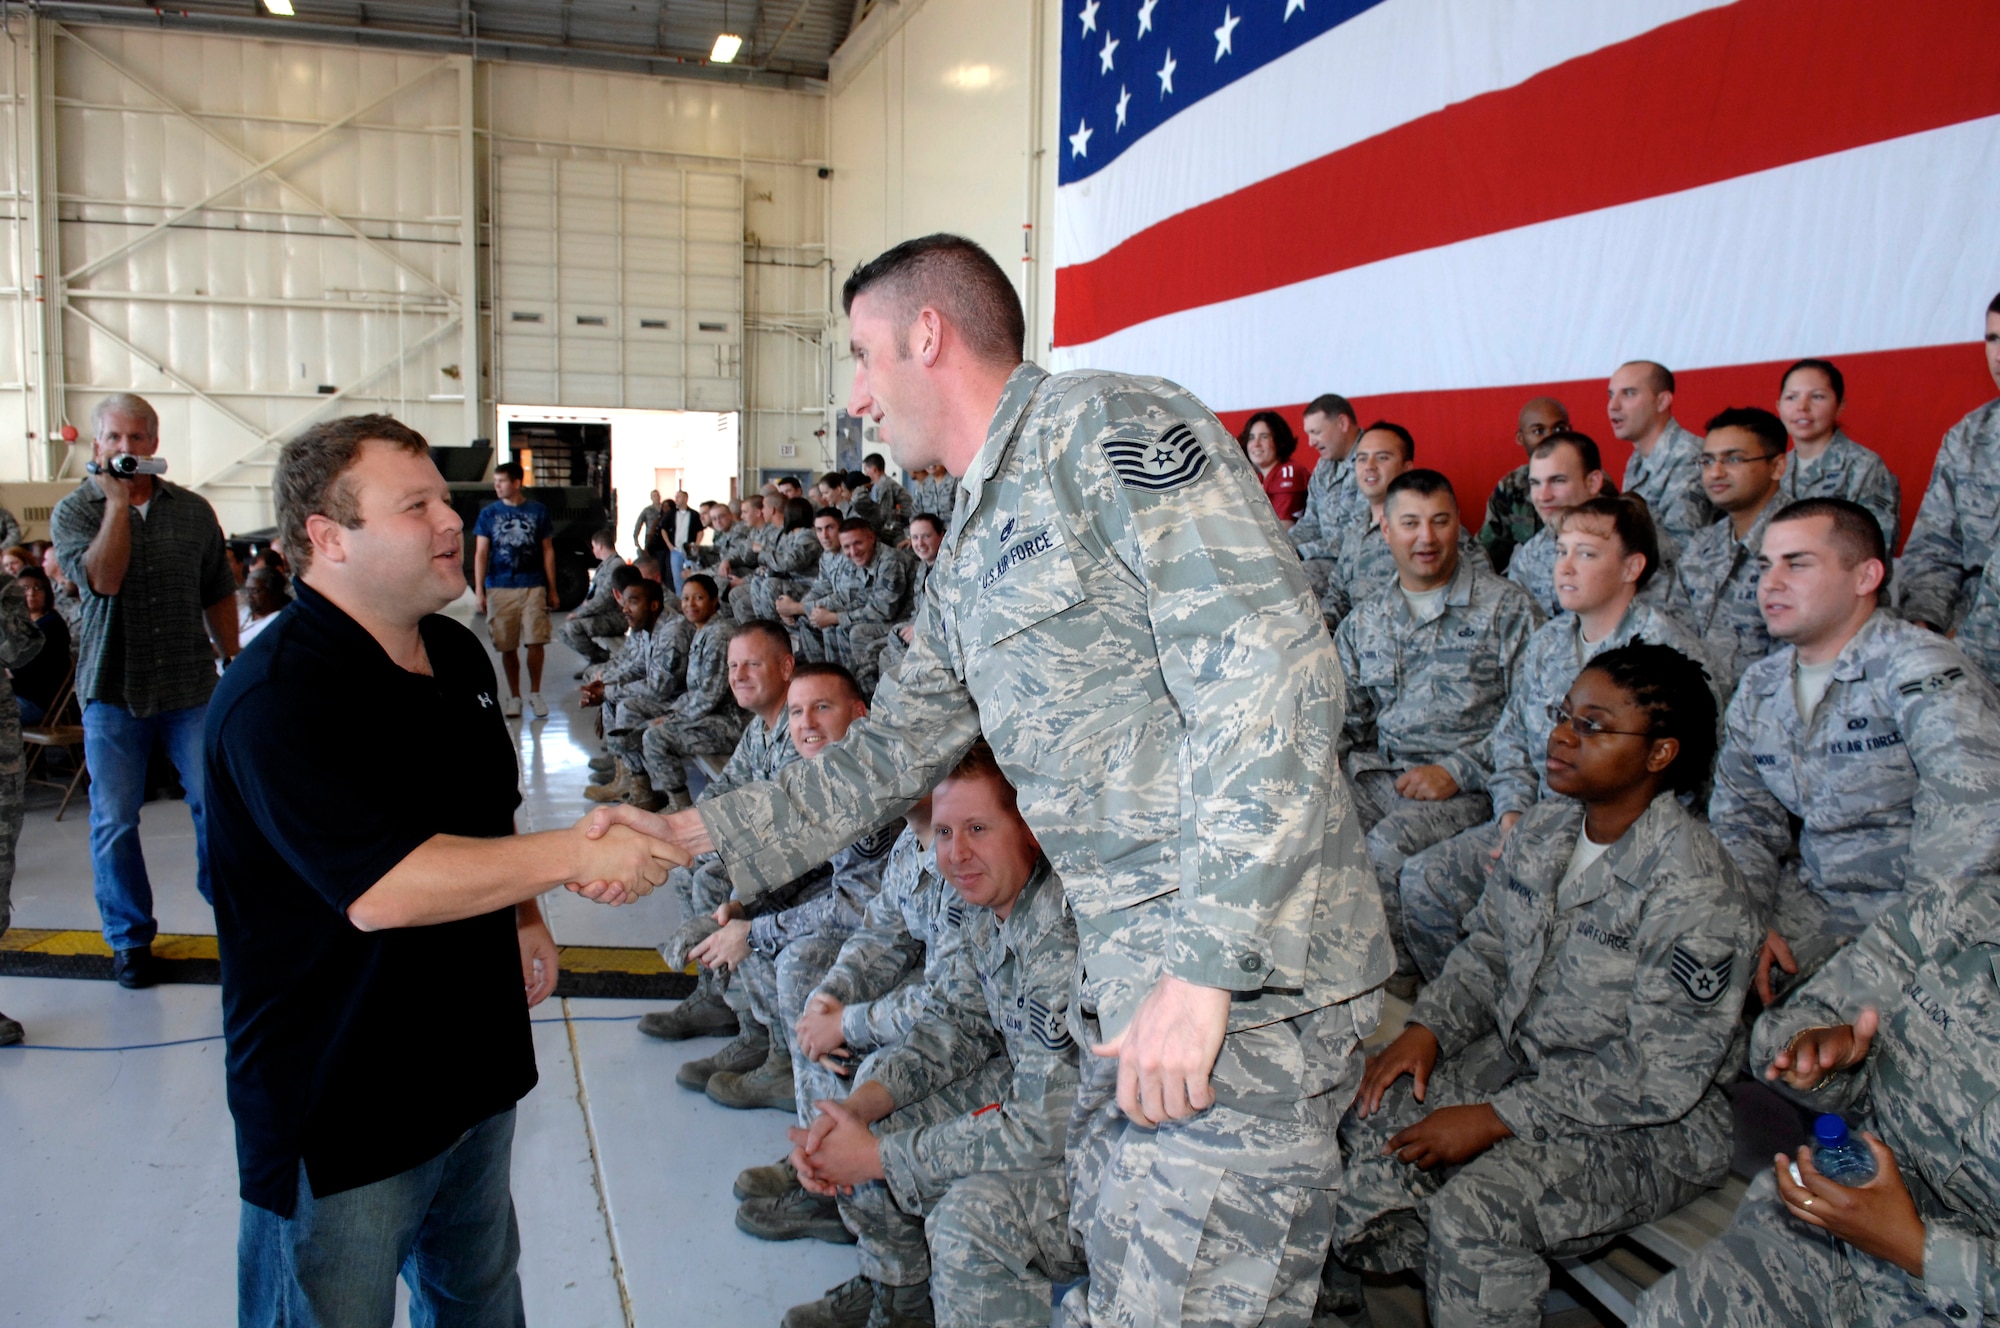 Comedian and impressionist Frank Caliendo takes a moment to greet military members in the audience before he tapes his FOX NFL pregame show segment at Luke Air Force Base, Ariz. (U.S. Air Force photo by Staff Sgt. Gary Mathieson)